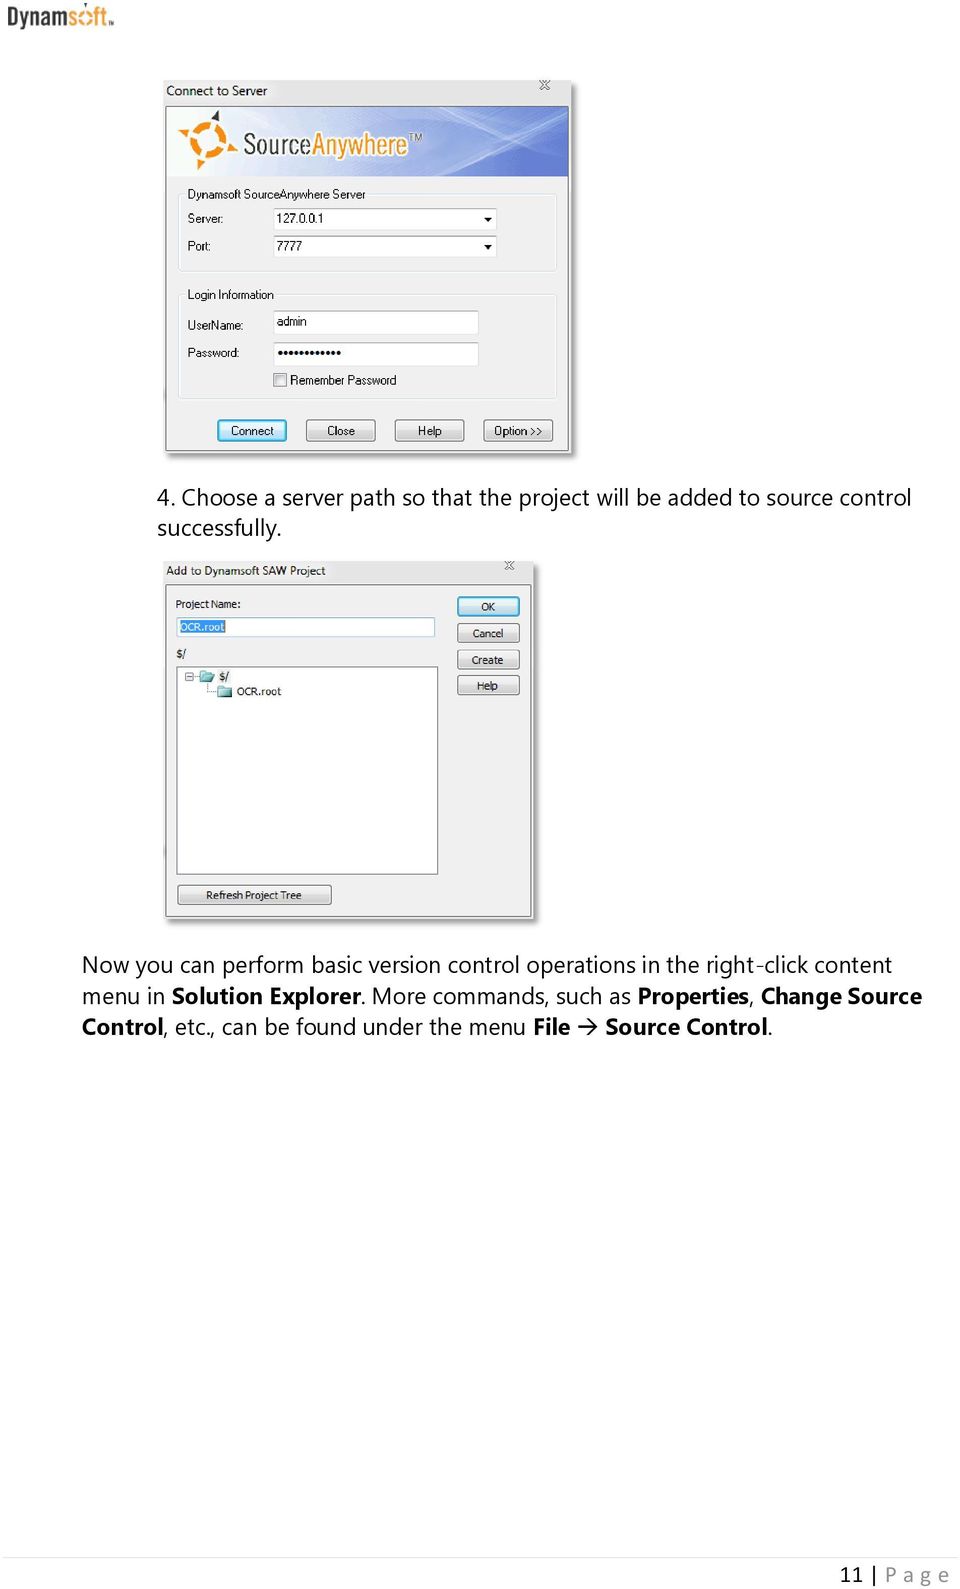 Now you can perform basic version control operations in the right-click content